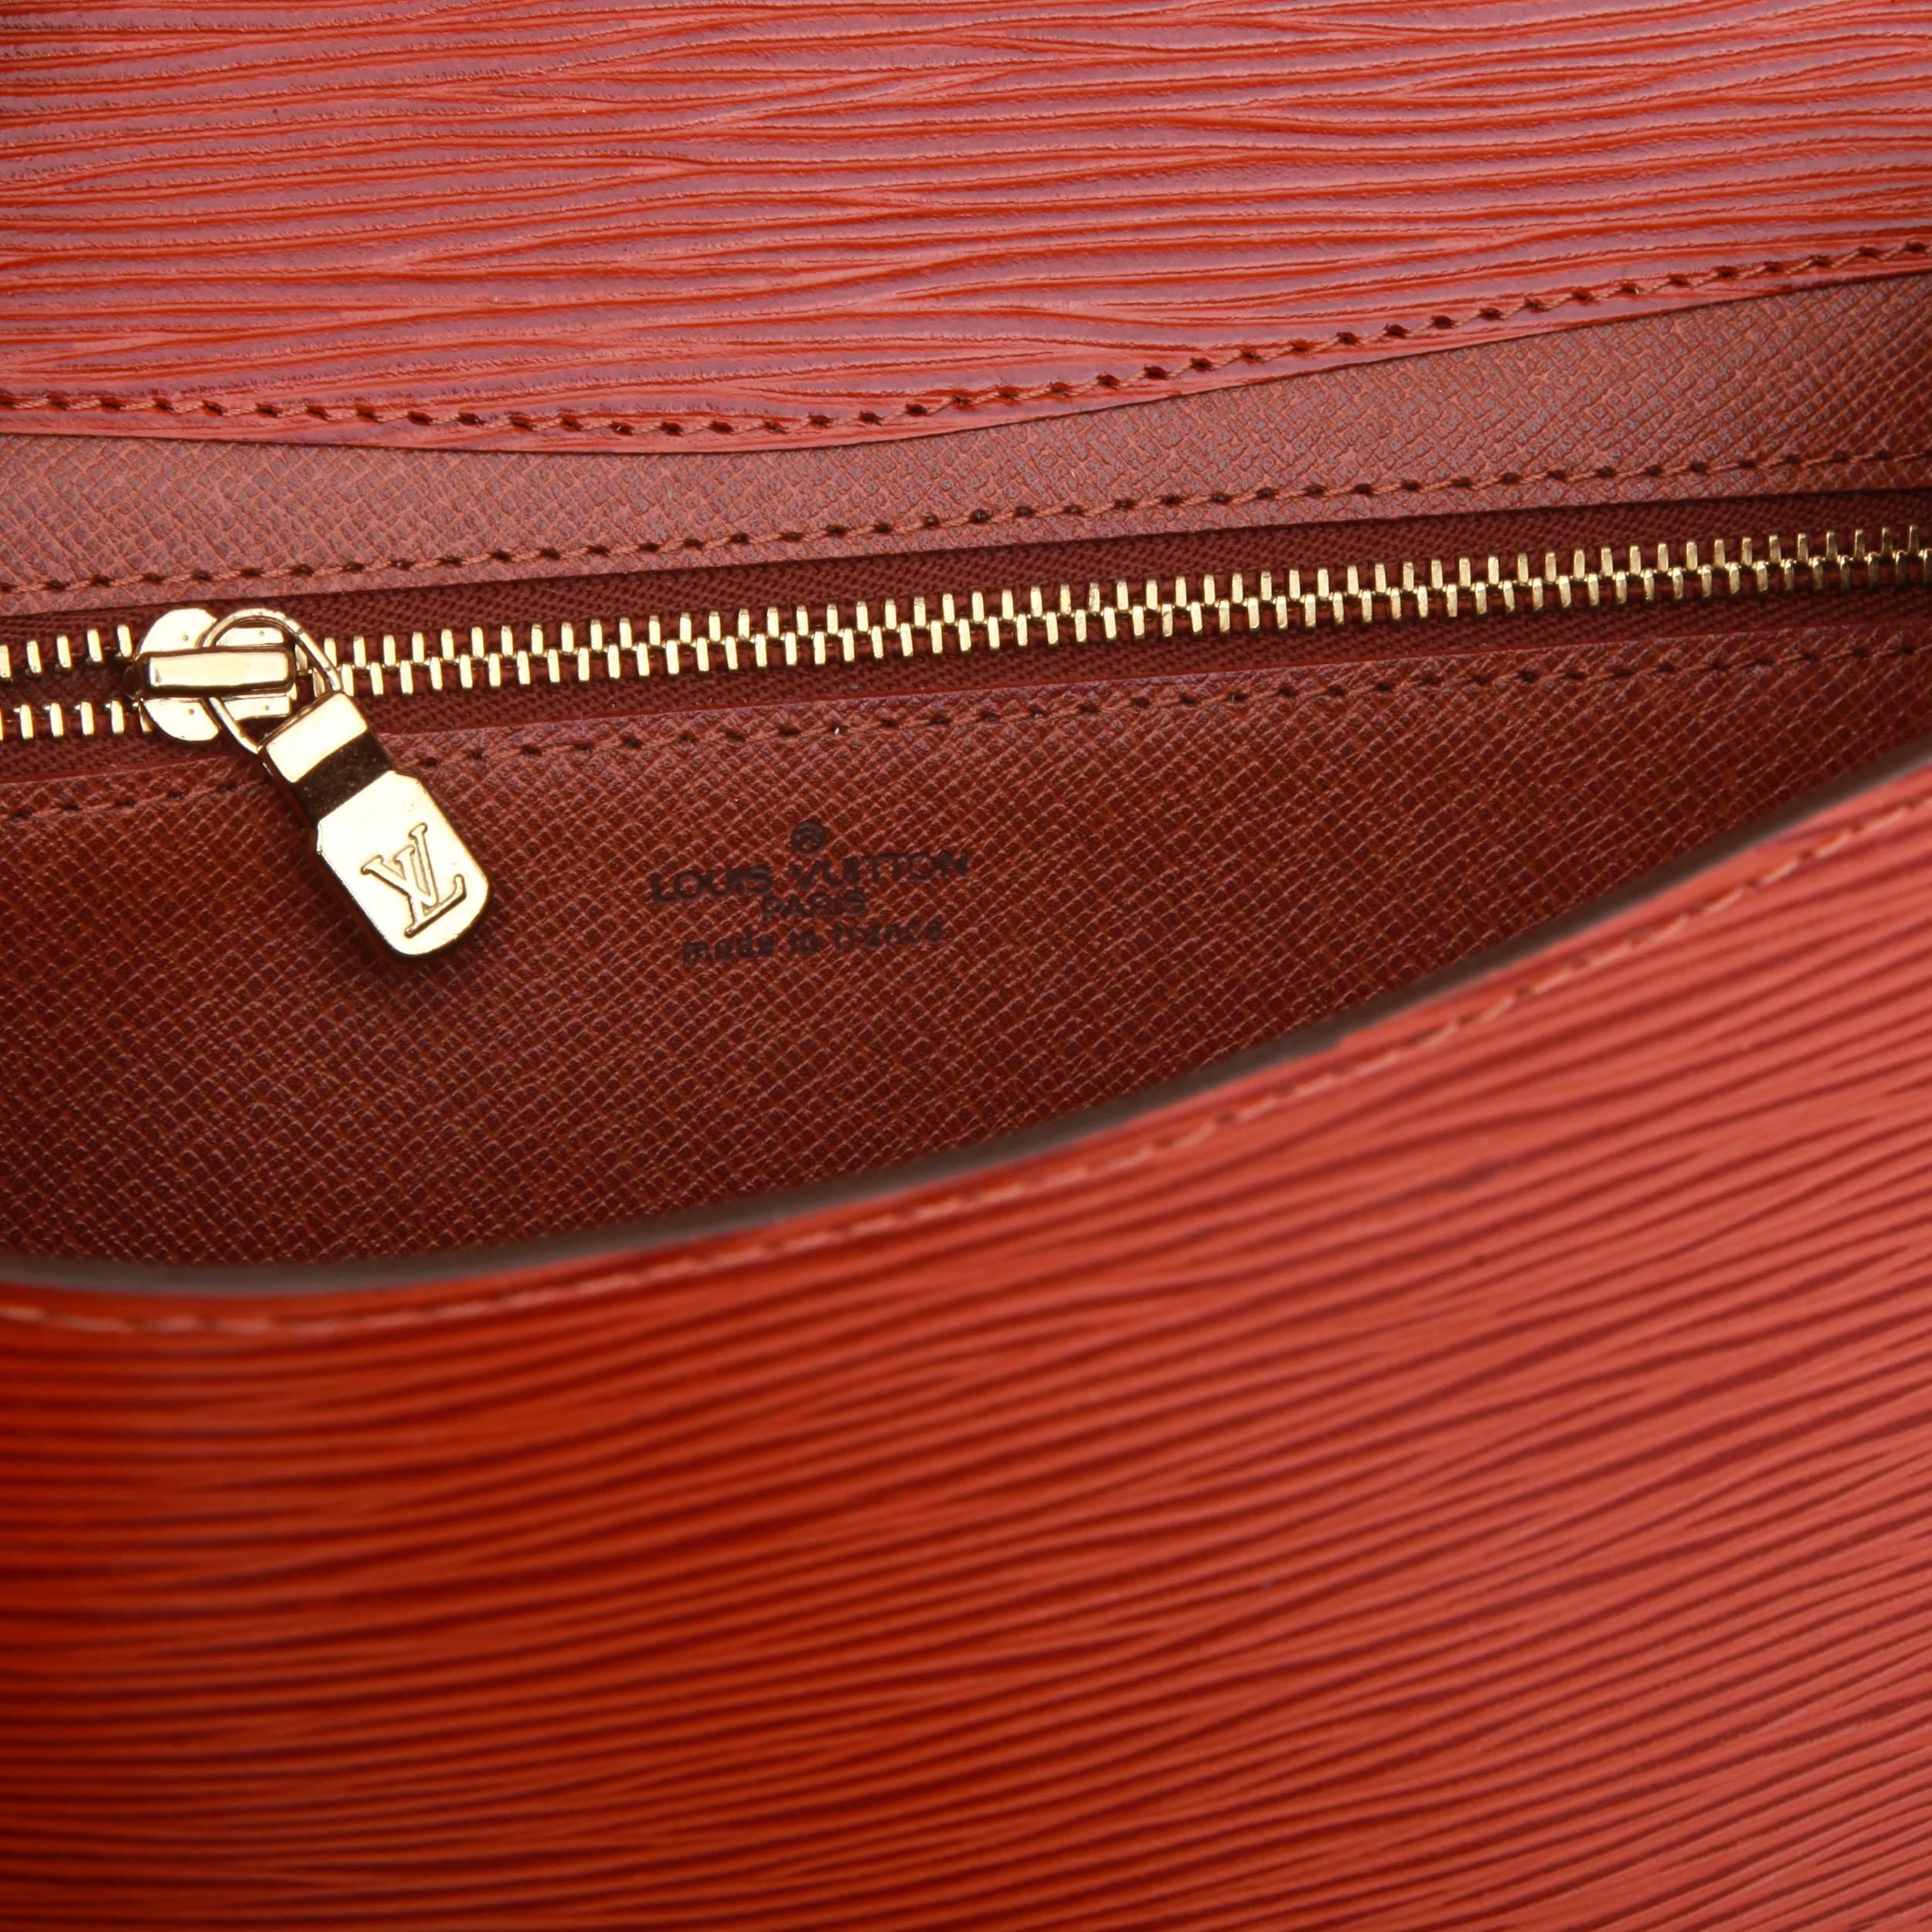 LOUIS VUITTON Vintage Clutch in Tawny Epi Leather 4